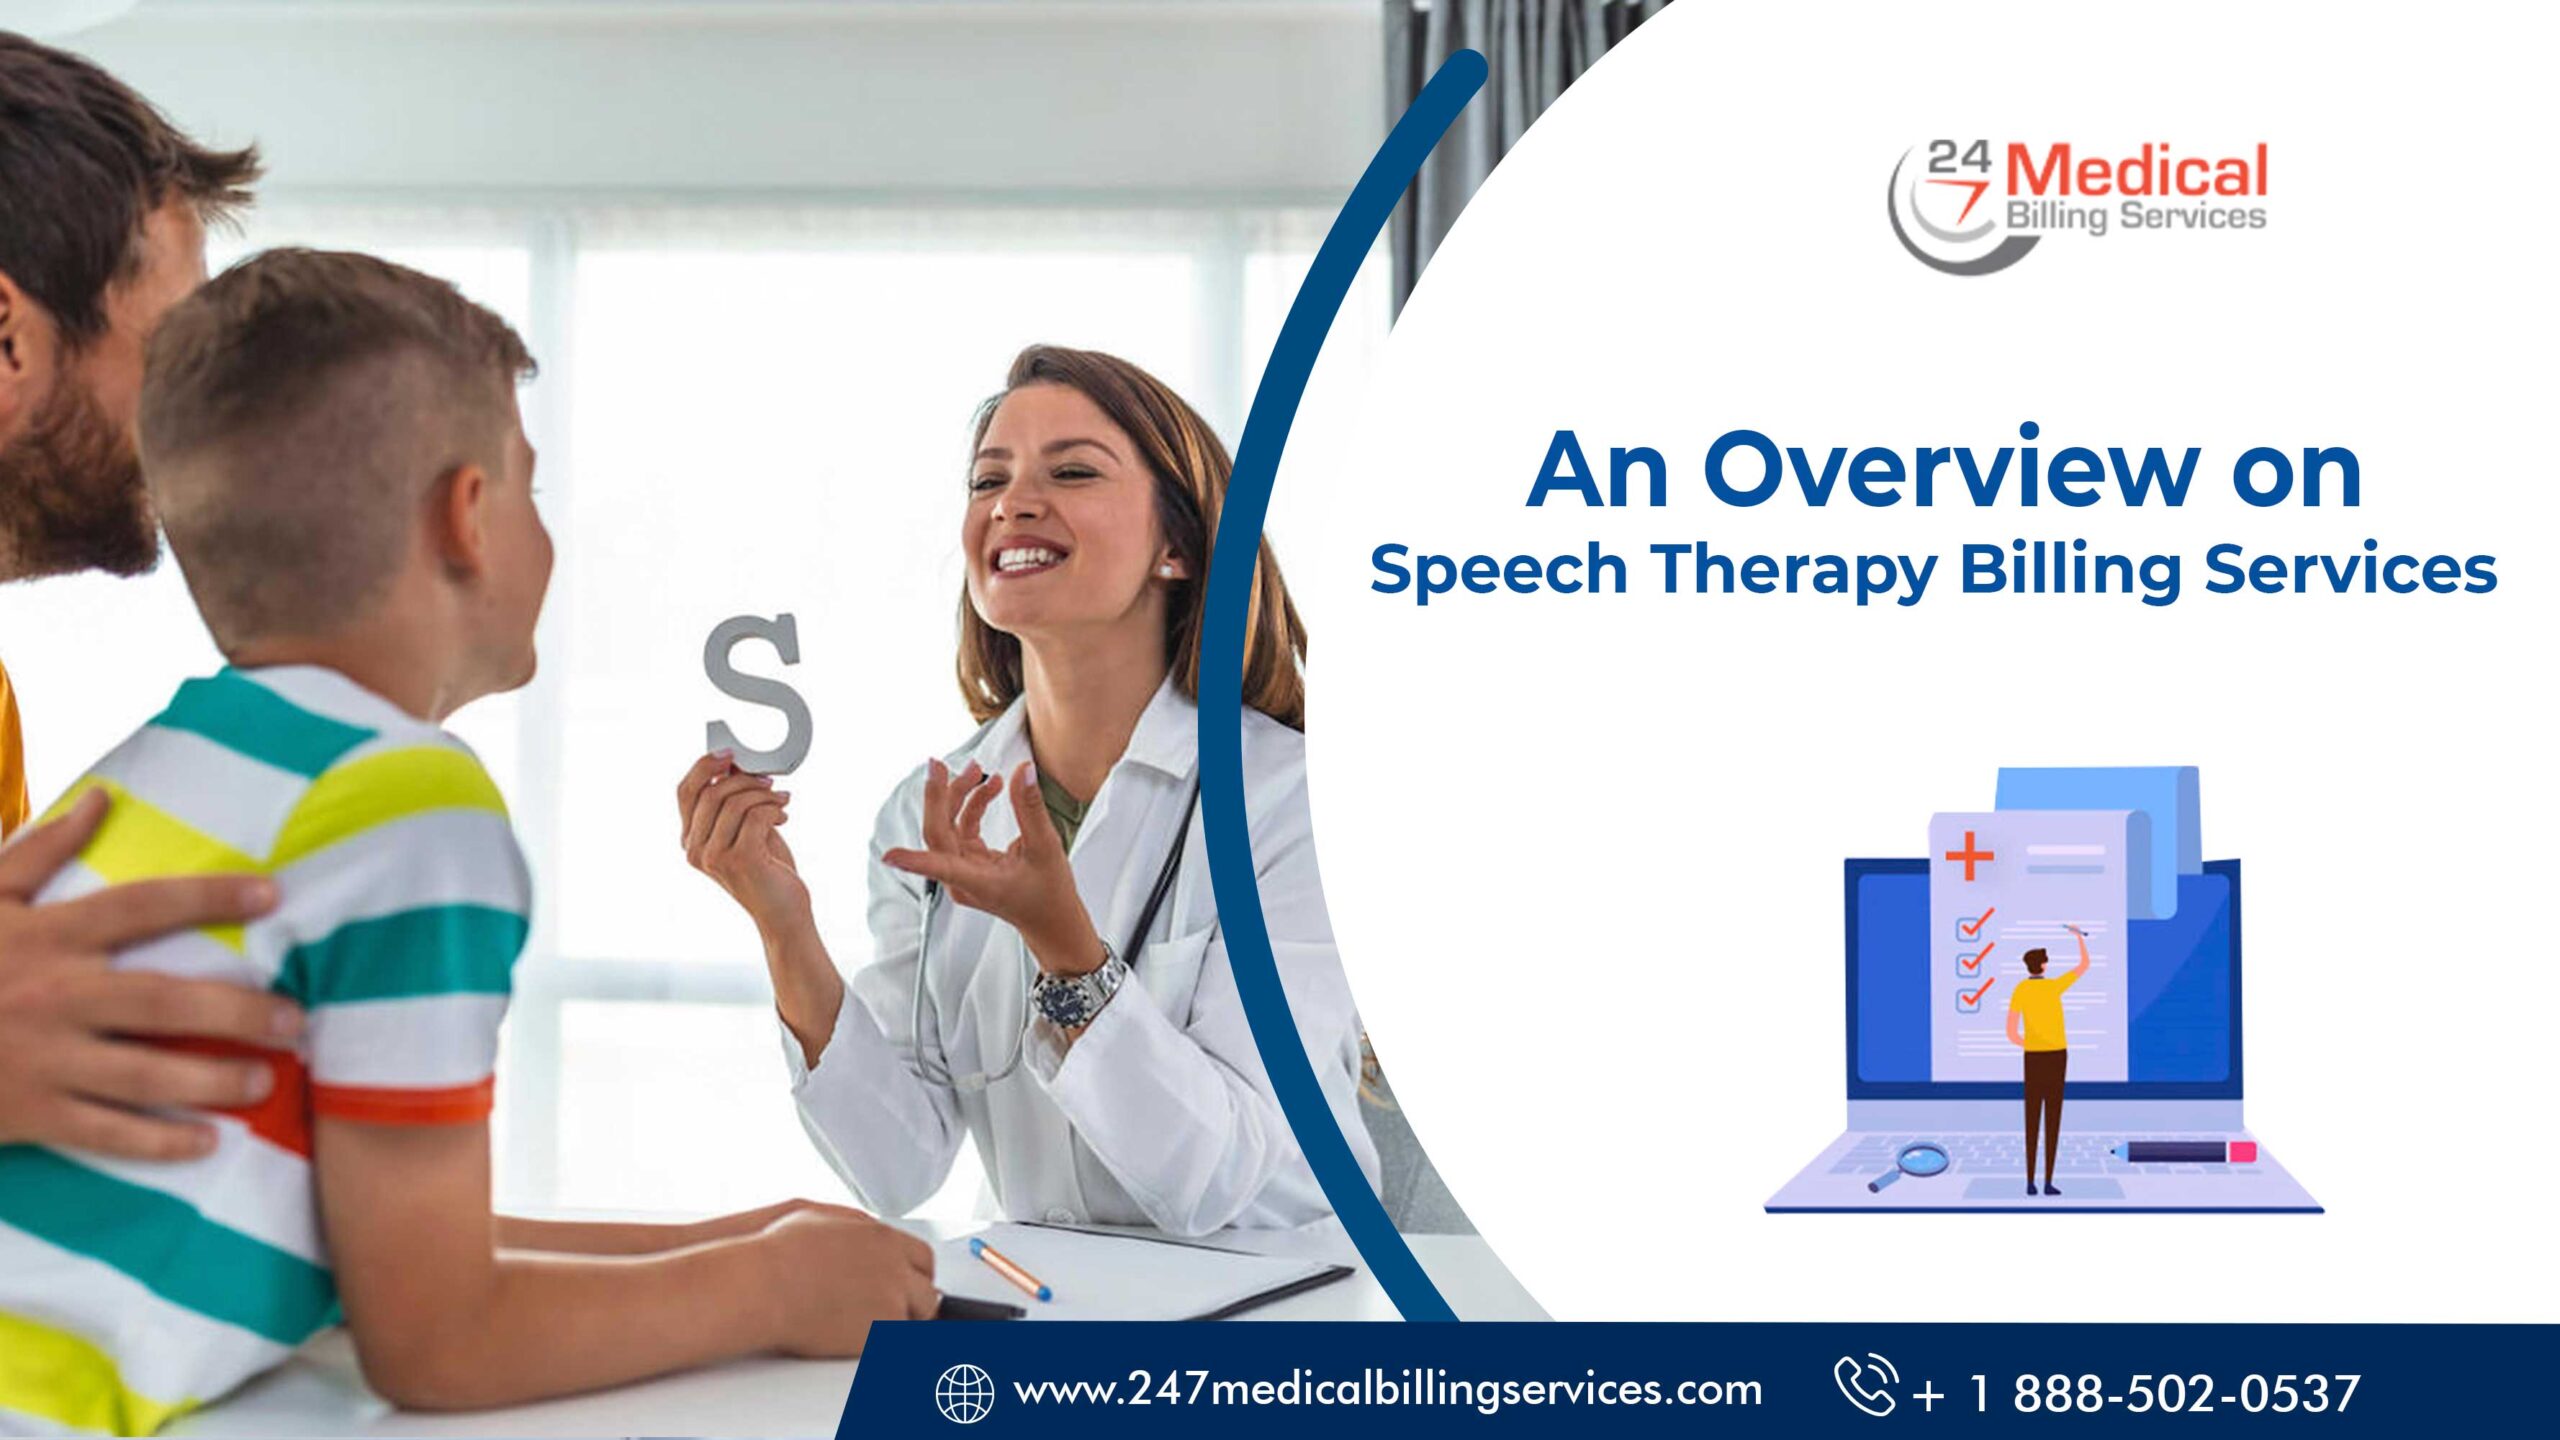  An Overview on Speech Therapy Billing Services